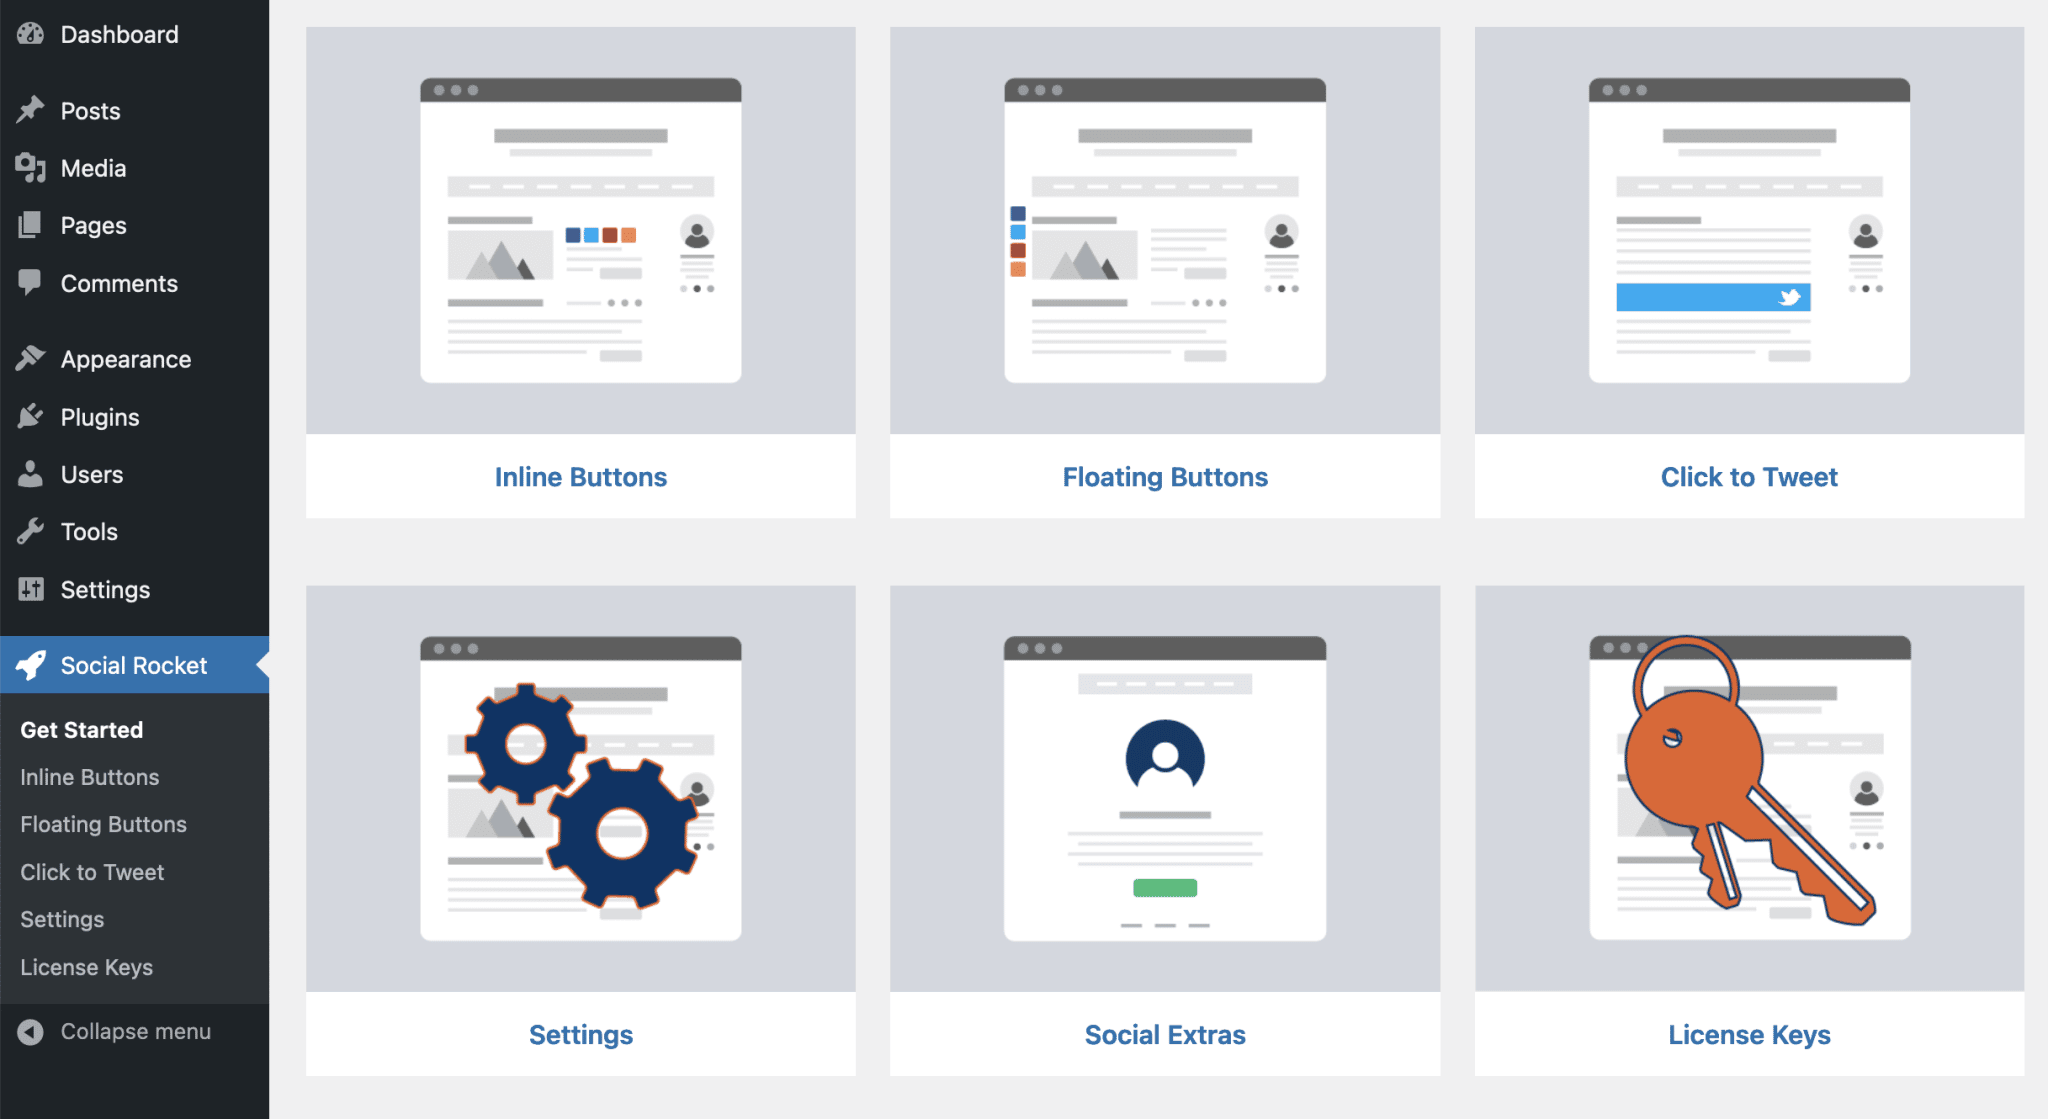 The dashboard of the Social Rocket plugin.